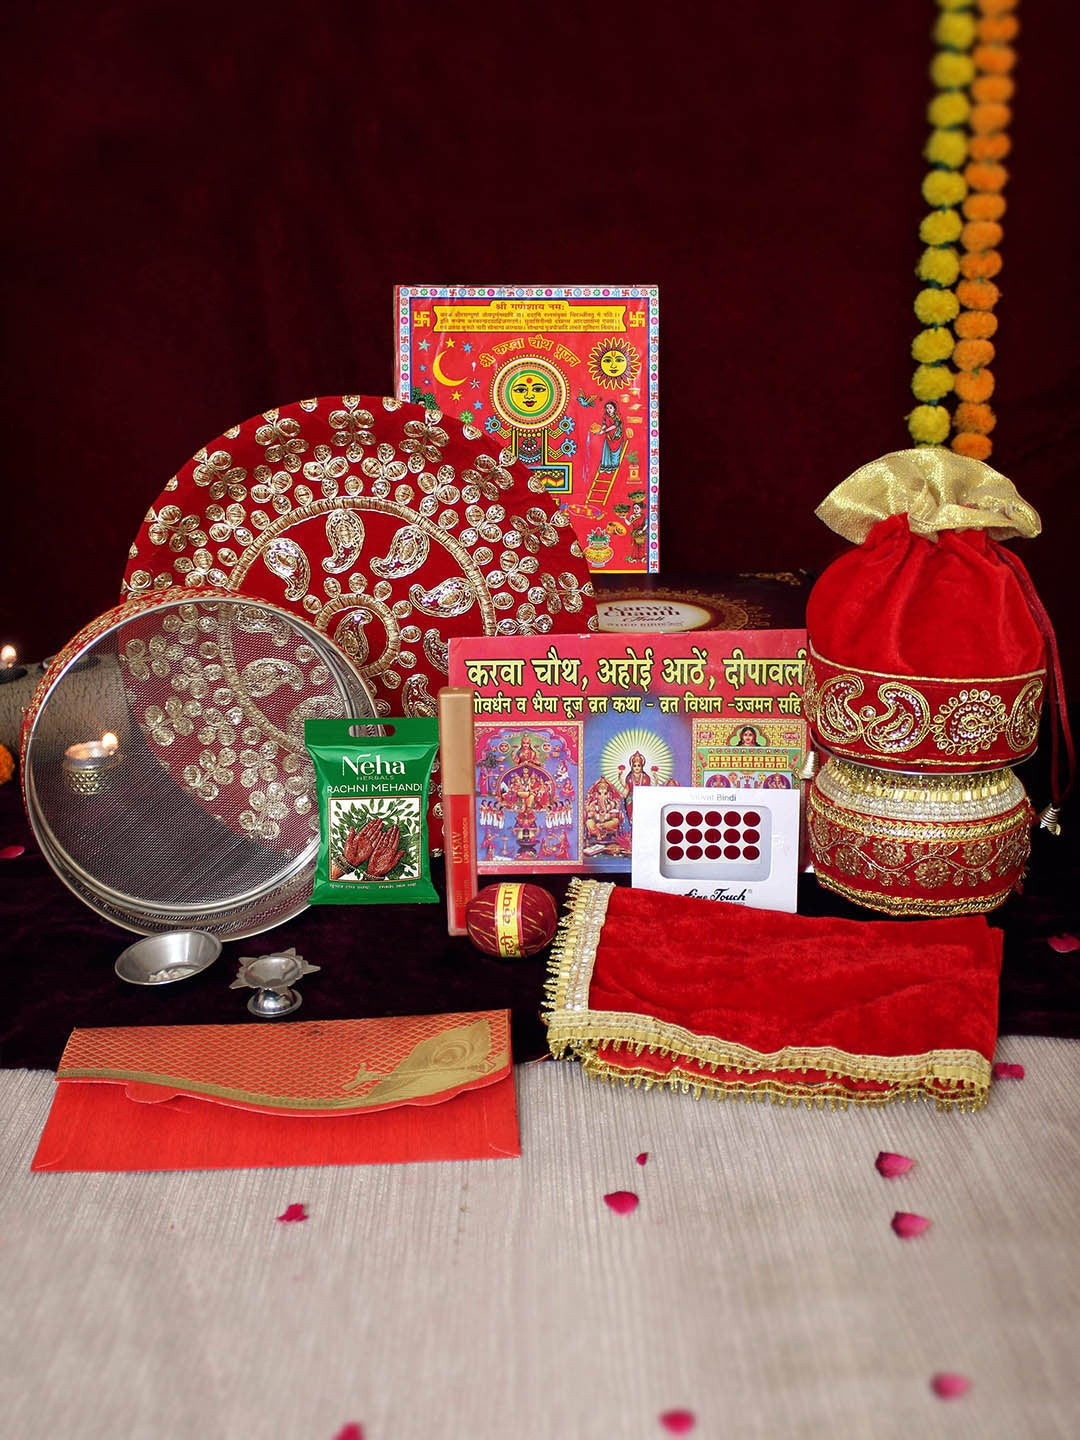 Personalised Karvachauth Thali Set with Pillow, Chani, Lota, Thaal Posh and  Thali (5 Items)| Best